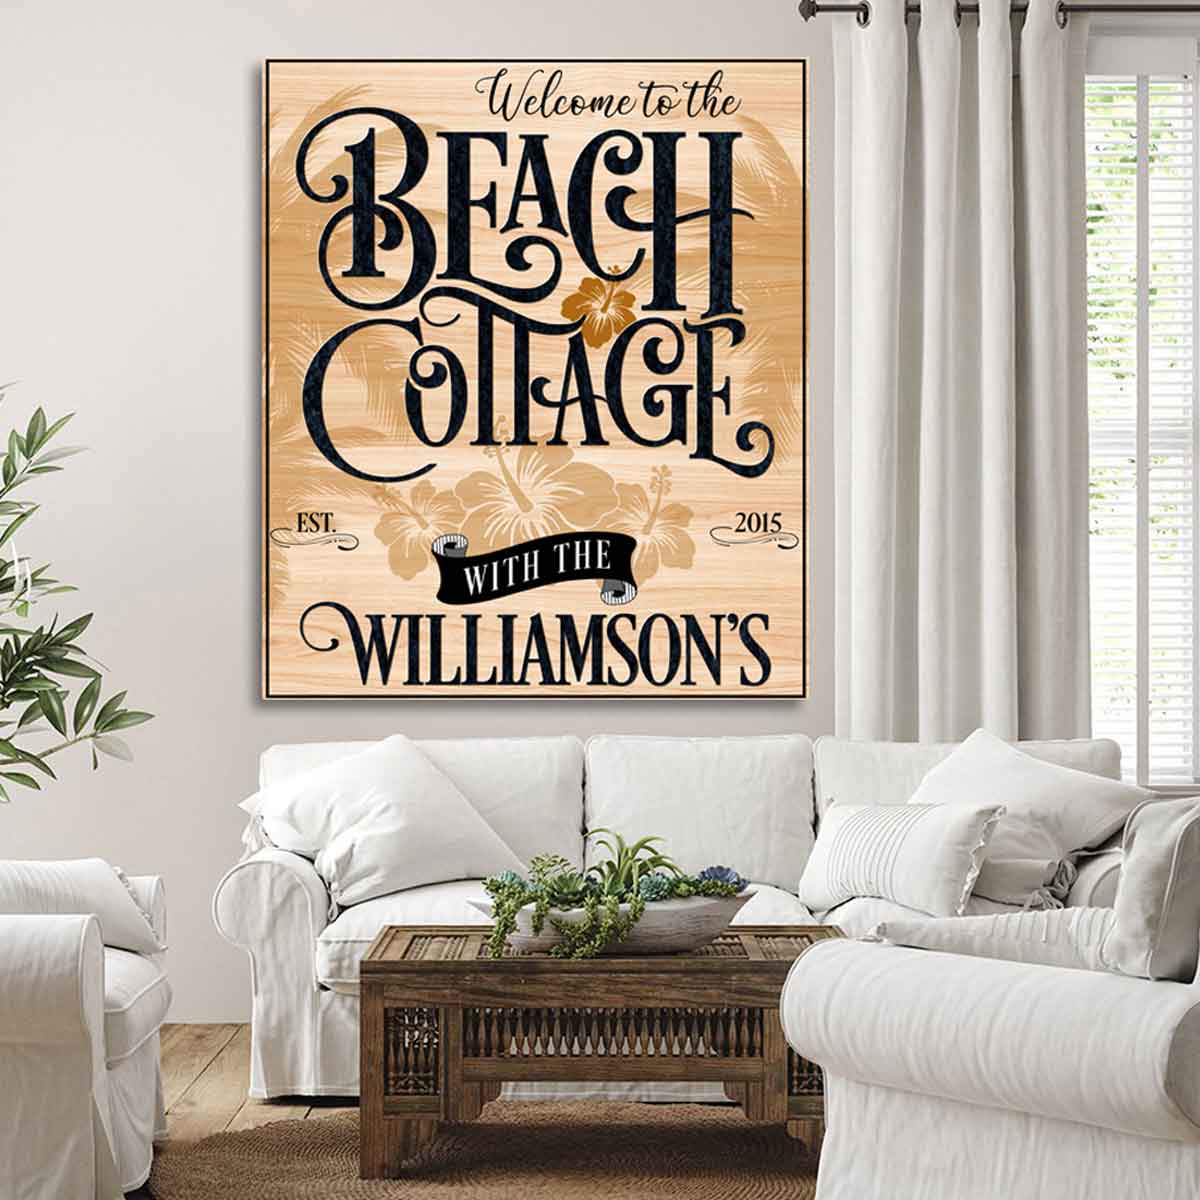 Beach House Sign {Welcome to the Beach Cottage} in big words, with the Family Name  and Est. date.